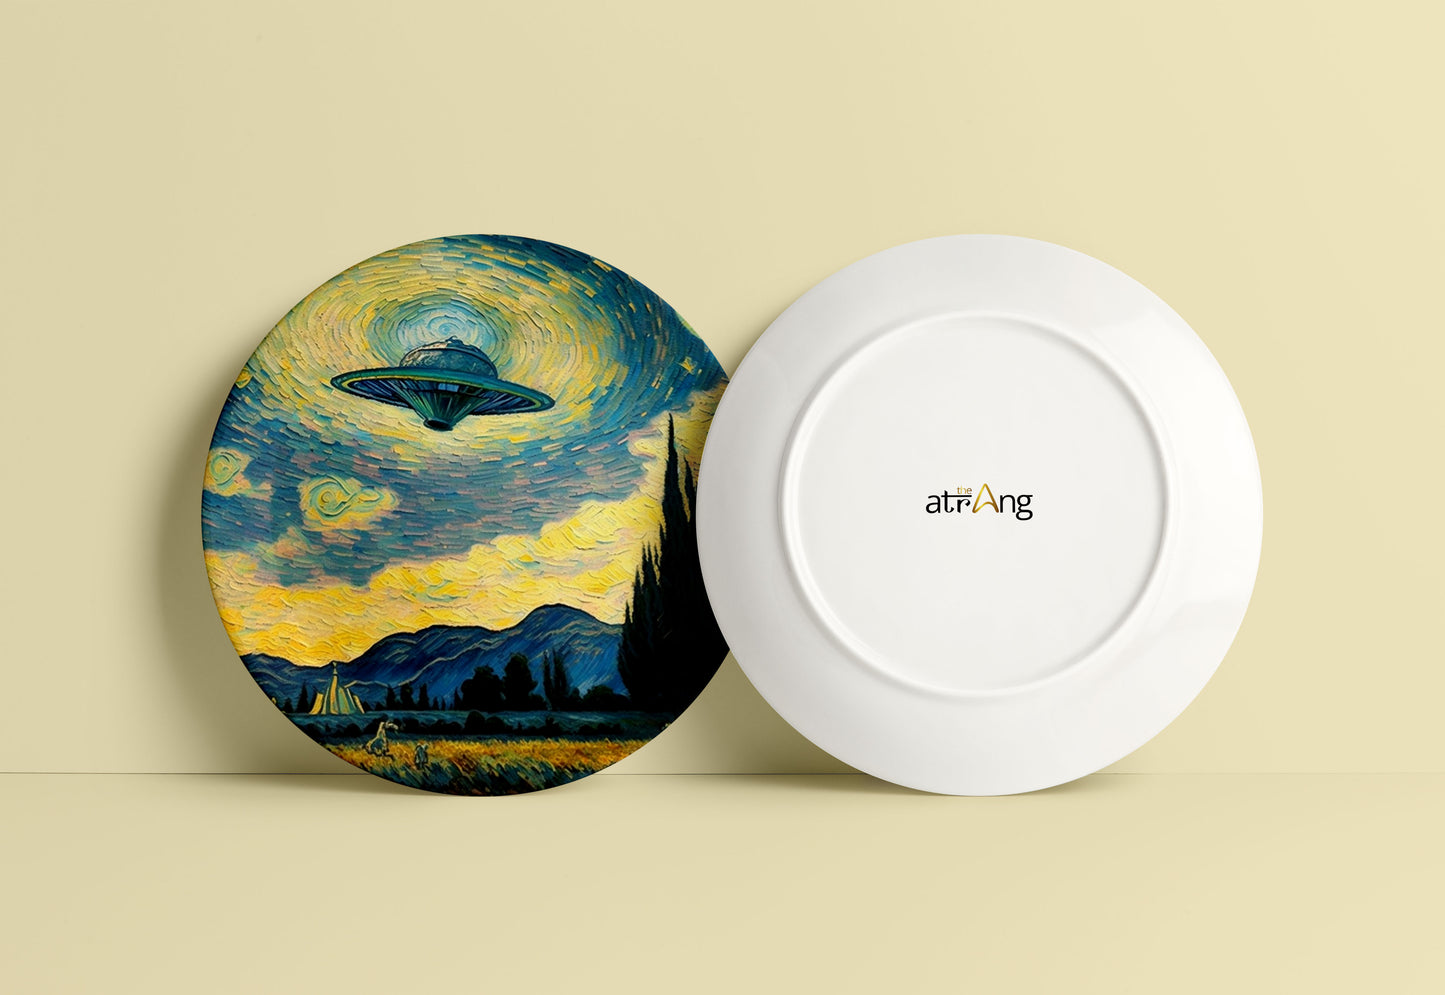 Spaceship Starry Nights Ceramic Plate for Home Decor